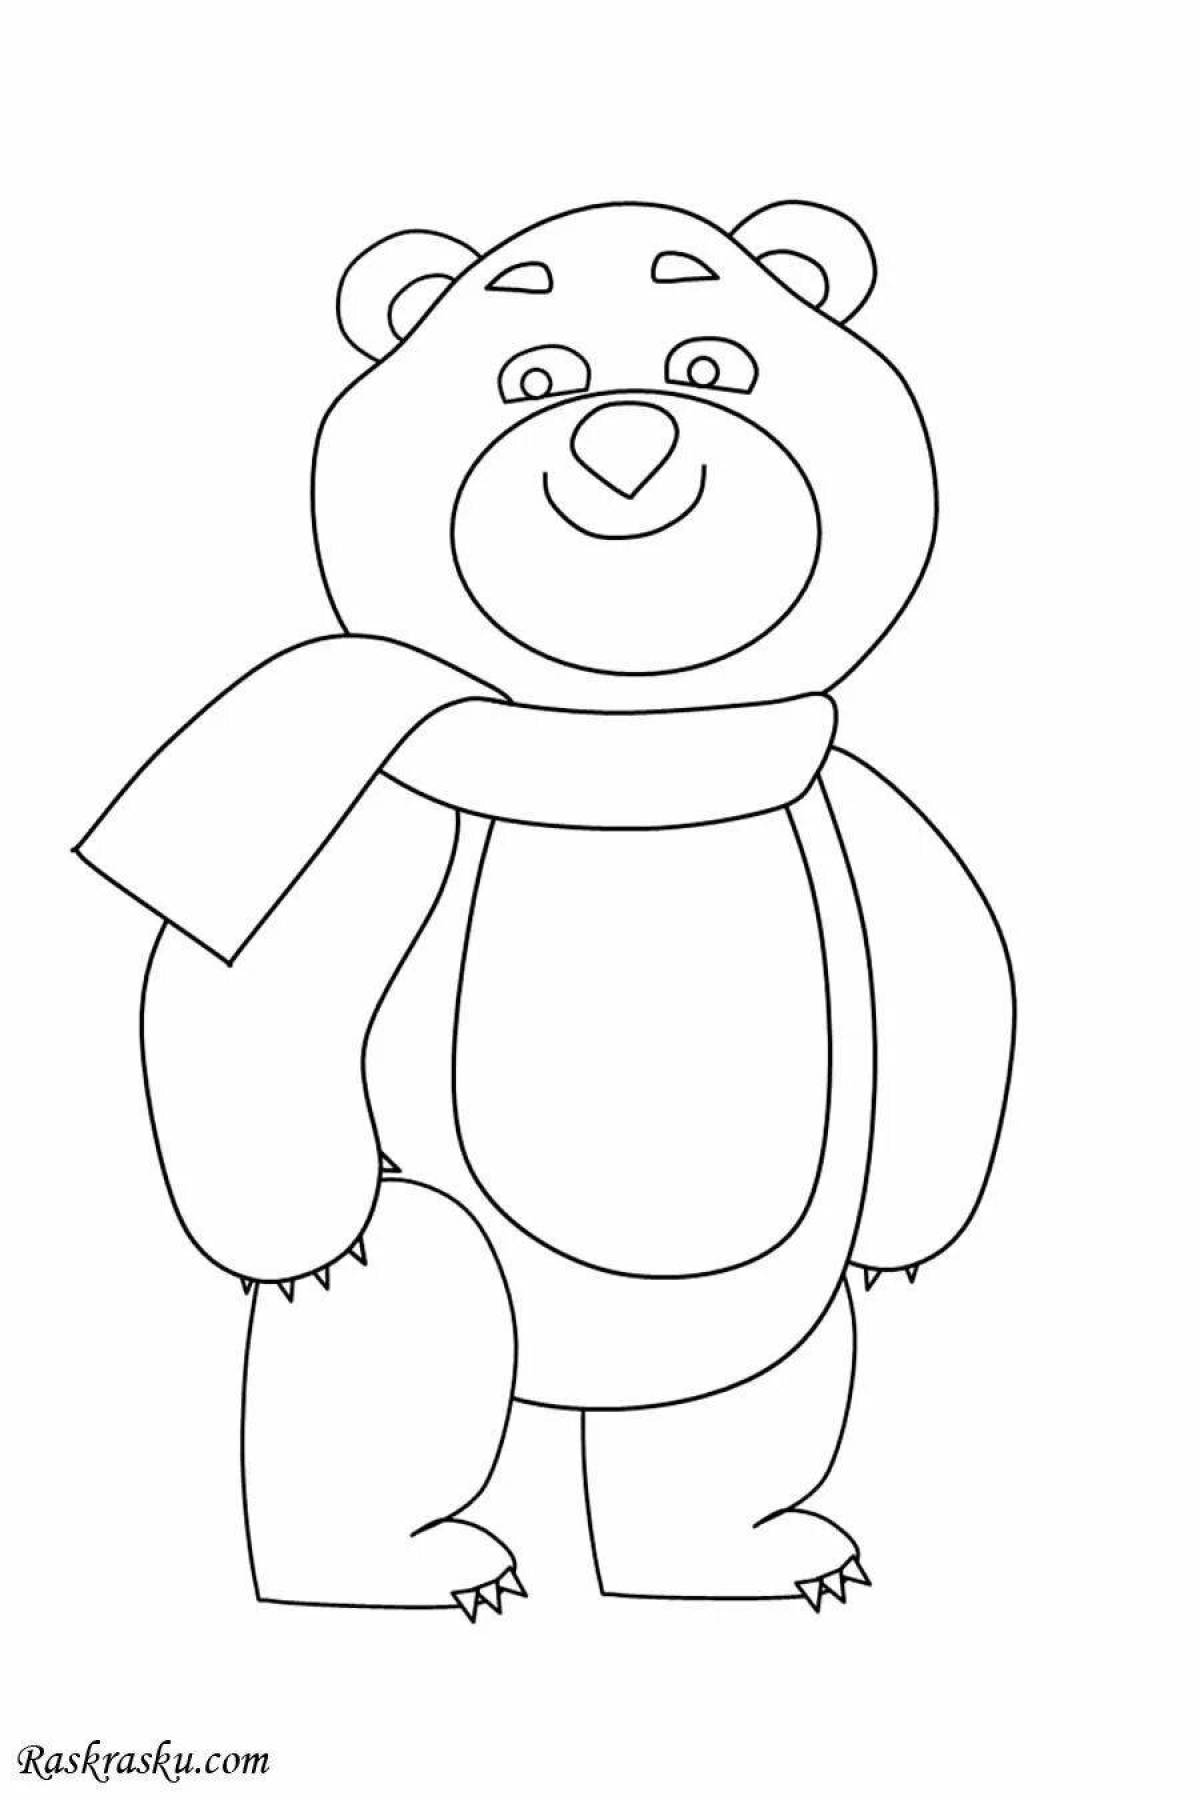 Impressive Russian bear coloring page